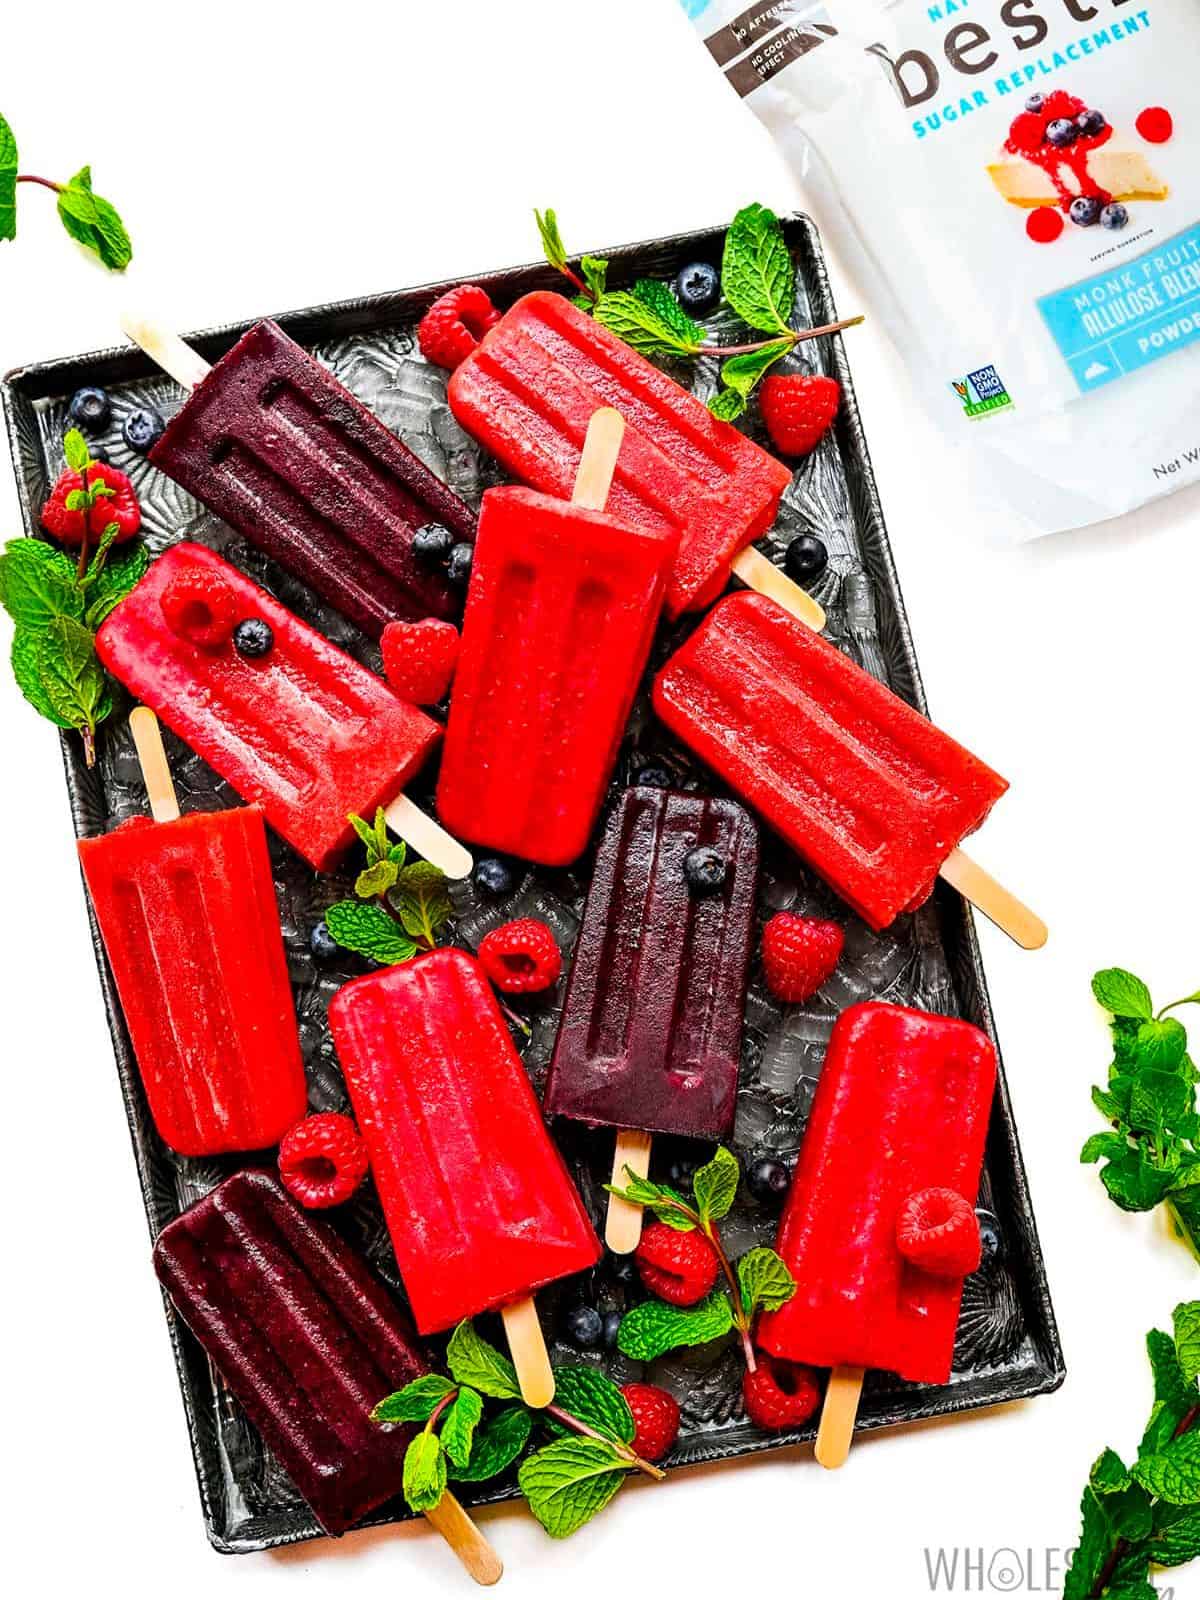 sugar-free berry popsicles made with sweet, tart, and classic fruit flavor.